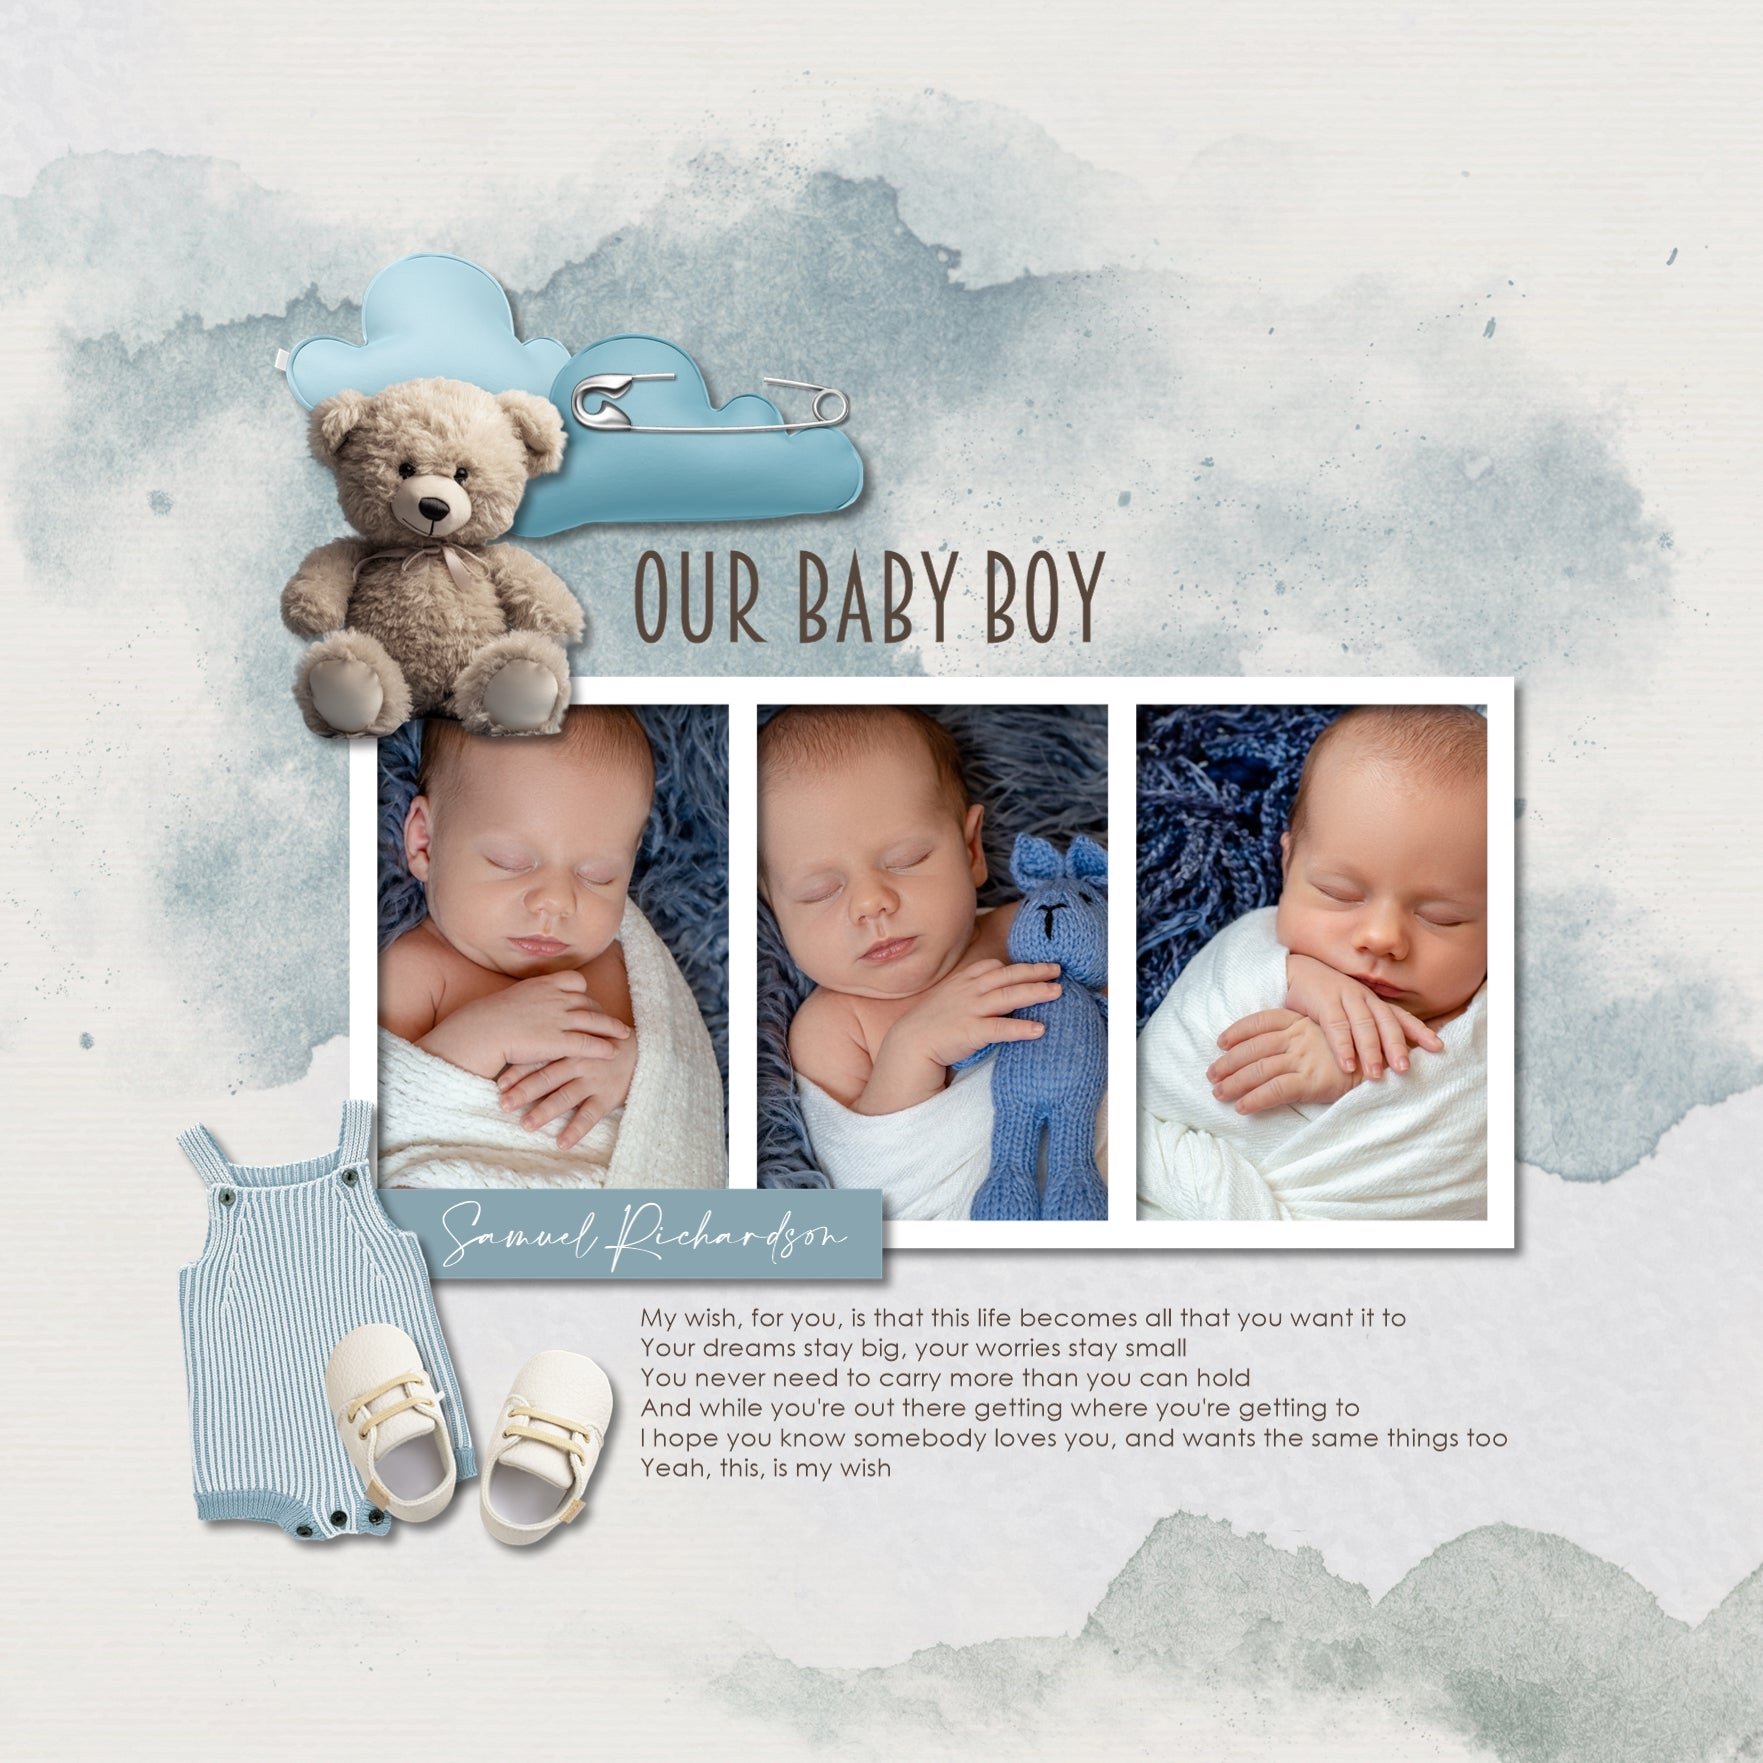 Capture the special moments of your baby through the toddler years with these pastel children's digital scrapbooking embellishments, neutral watercolor papers, photo frames, transparent watercolor spots, and a wood block alpha set by Lucky Girl Creative digital art. Create unique baby announcements, baby shower gifts, and even Baby's 1st Year, ABC books, and toddler albums.